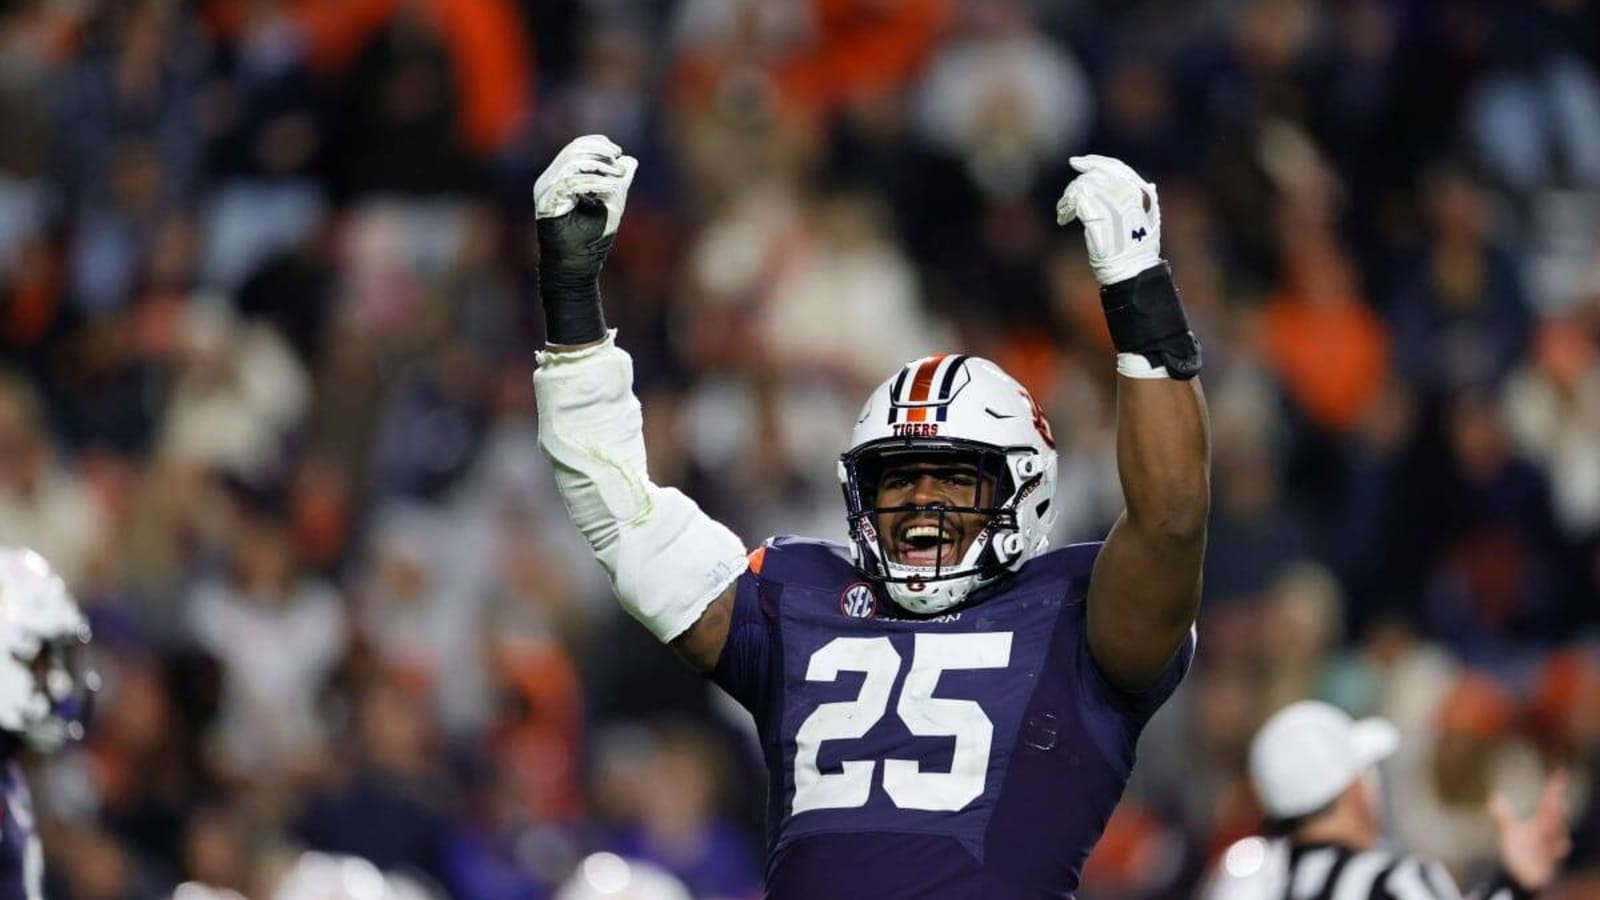 Auburn defensive lineman Colby Wooden declares for the NFL Draft